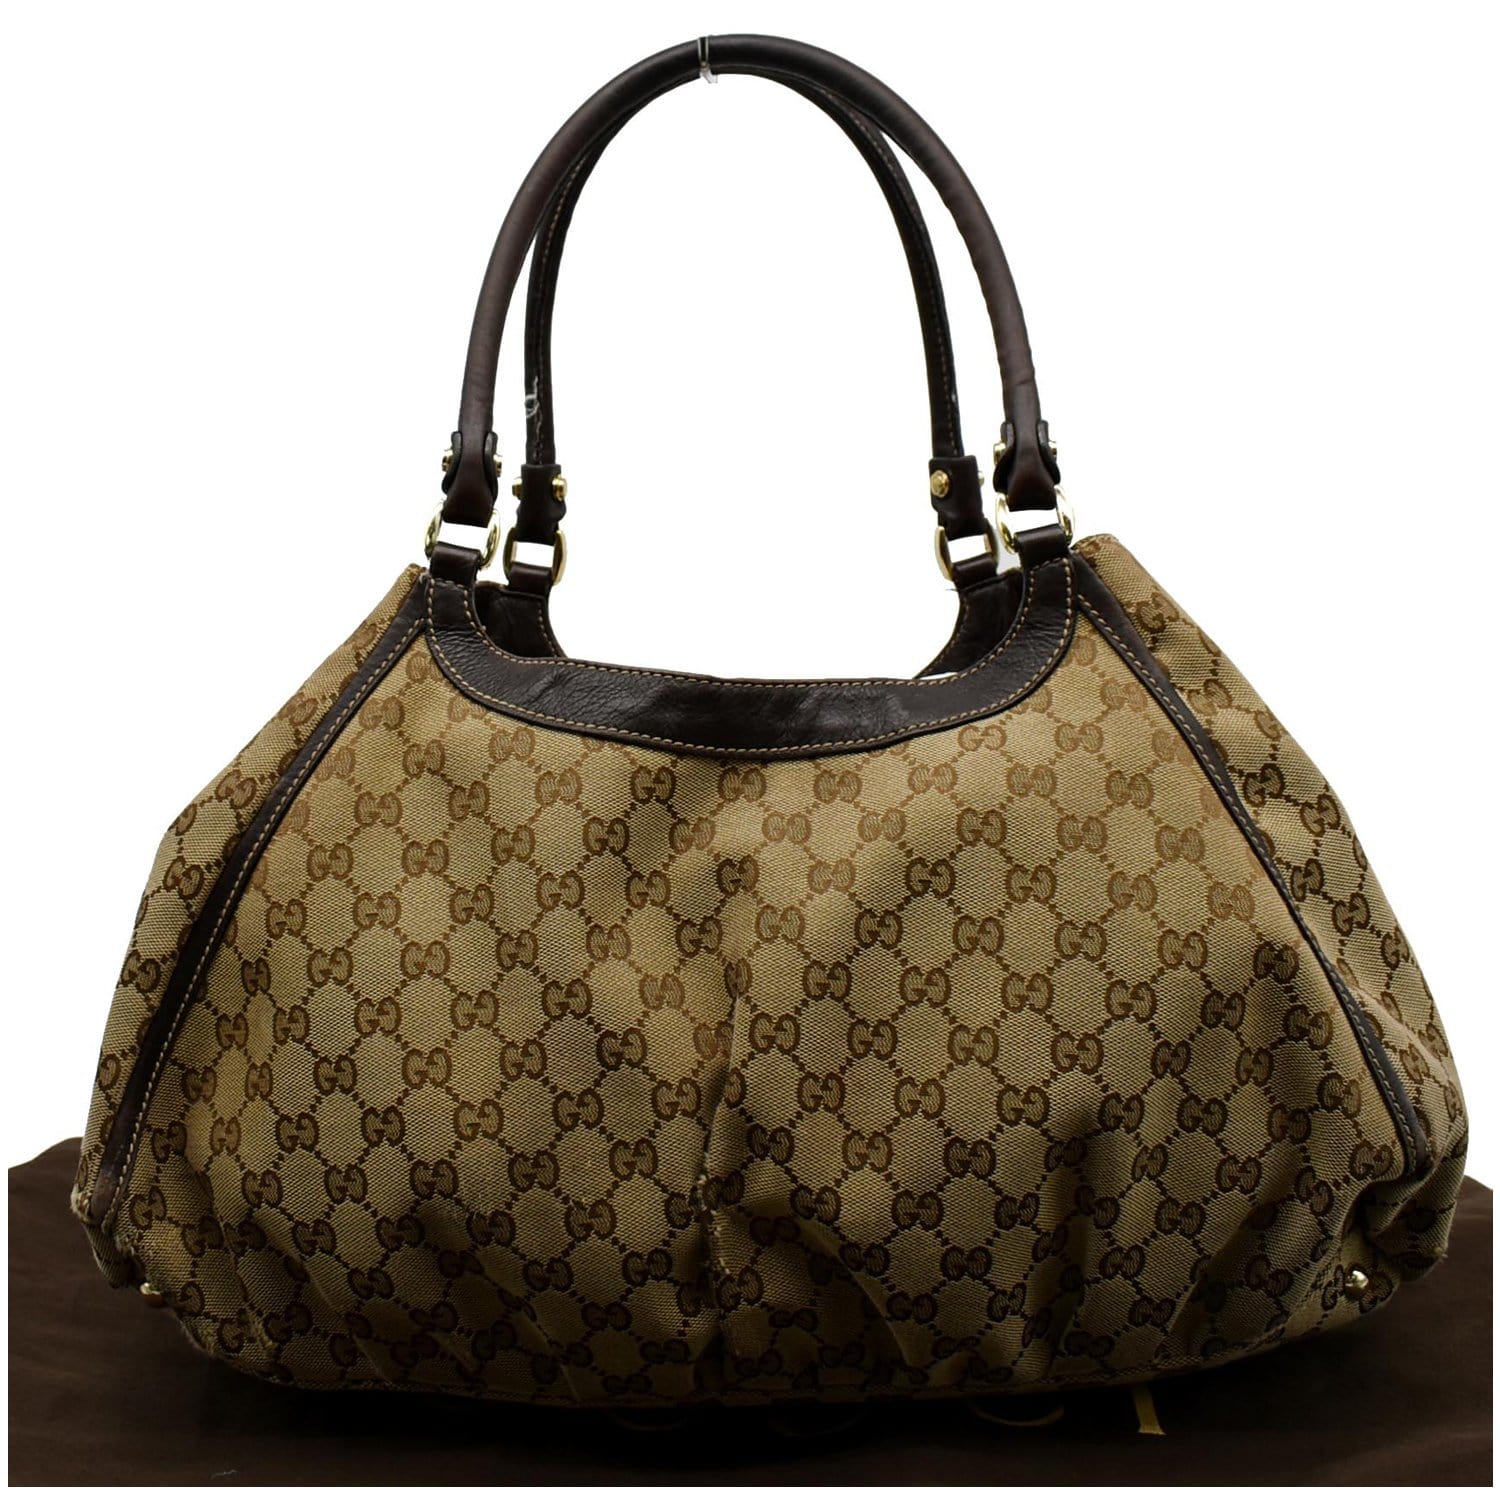 Used Authentic Gucci GG Large Hobo Bag